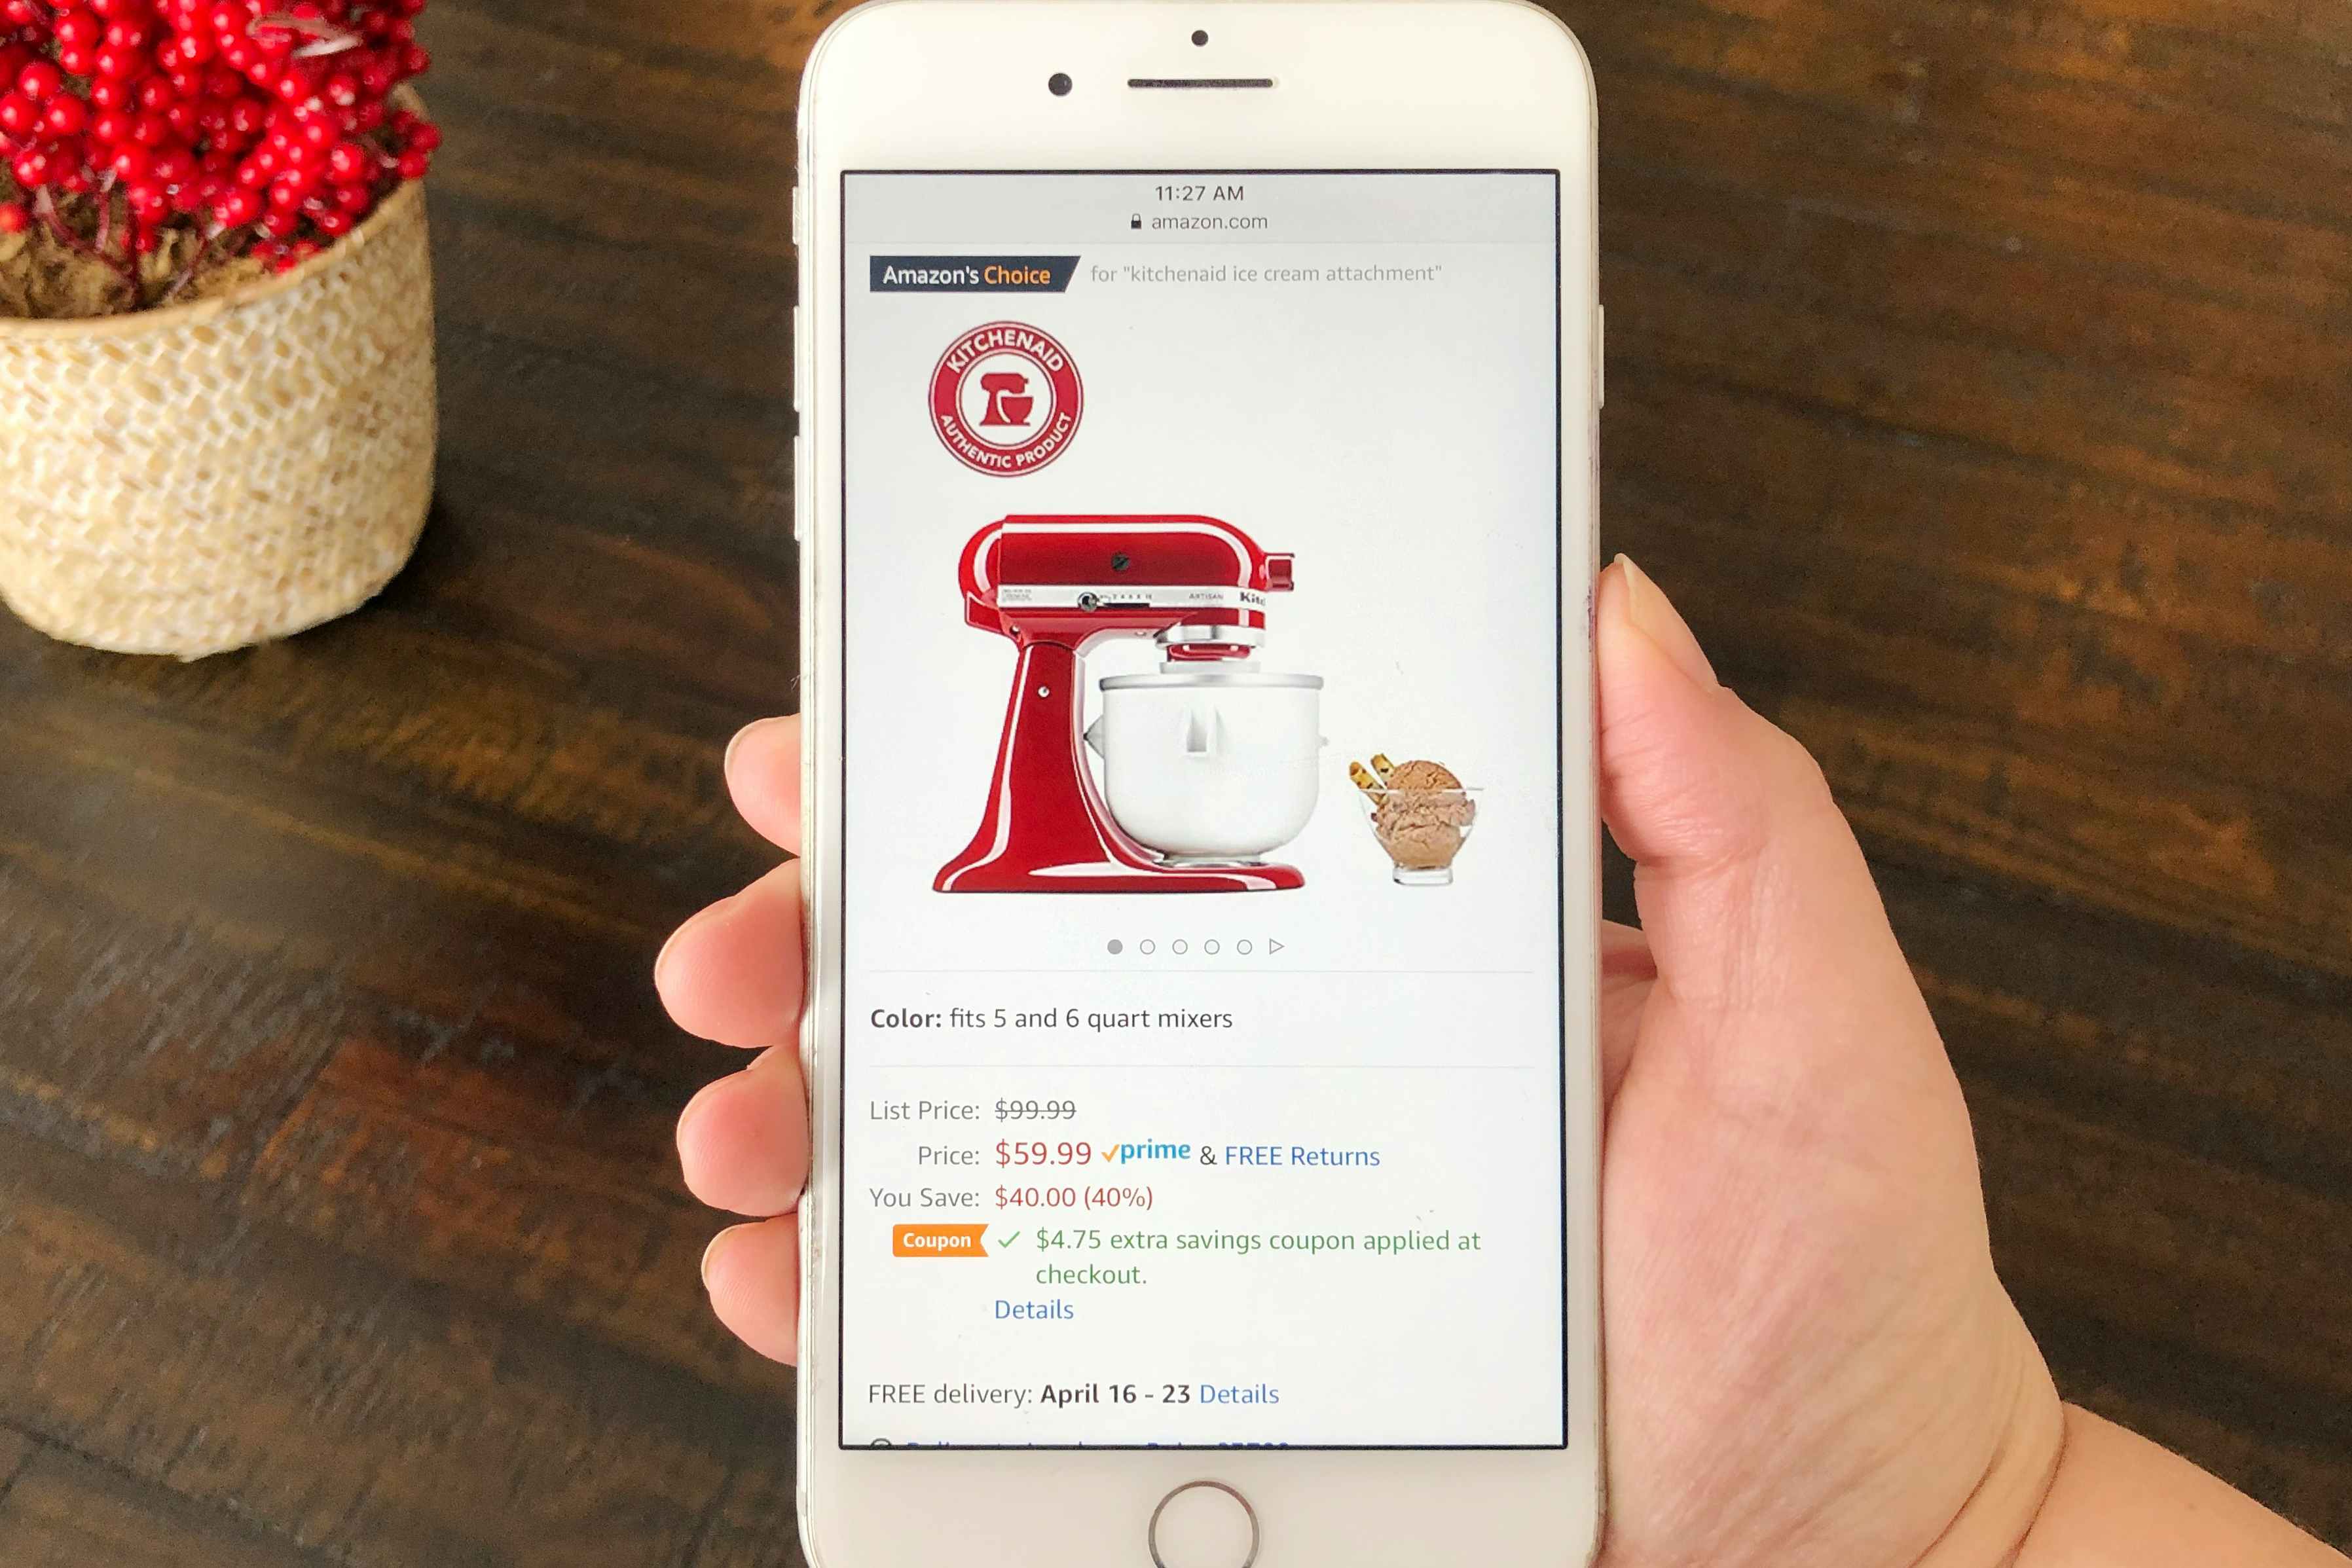 A phone screen with an amazon sale on the ice cream attachment for a Kitchenaid mixer.